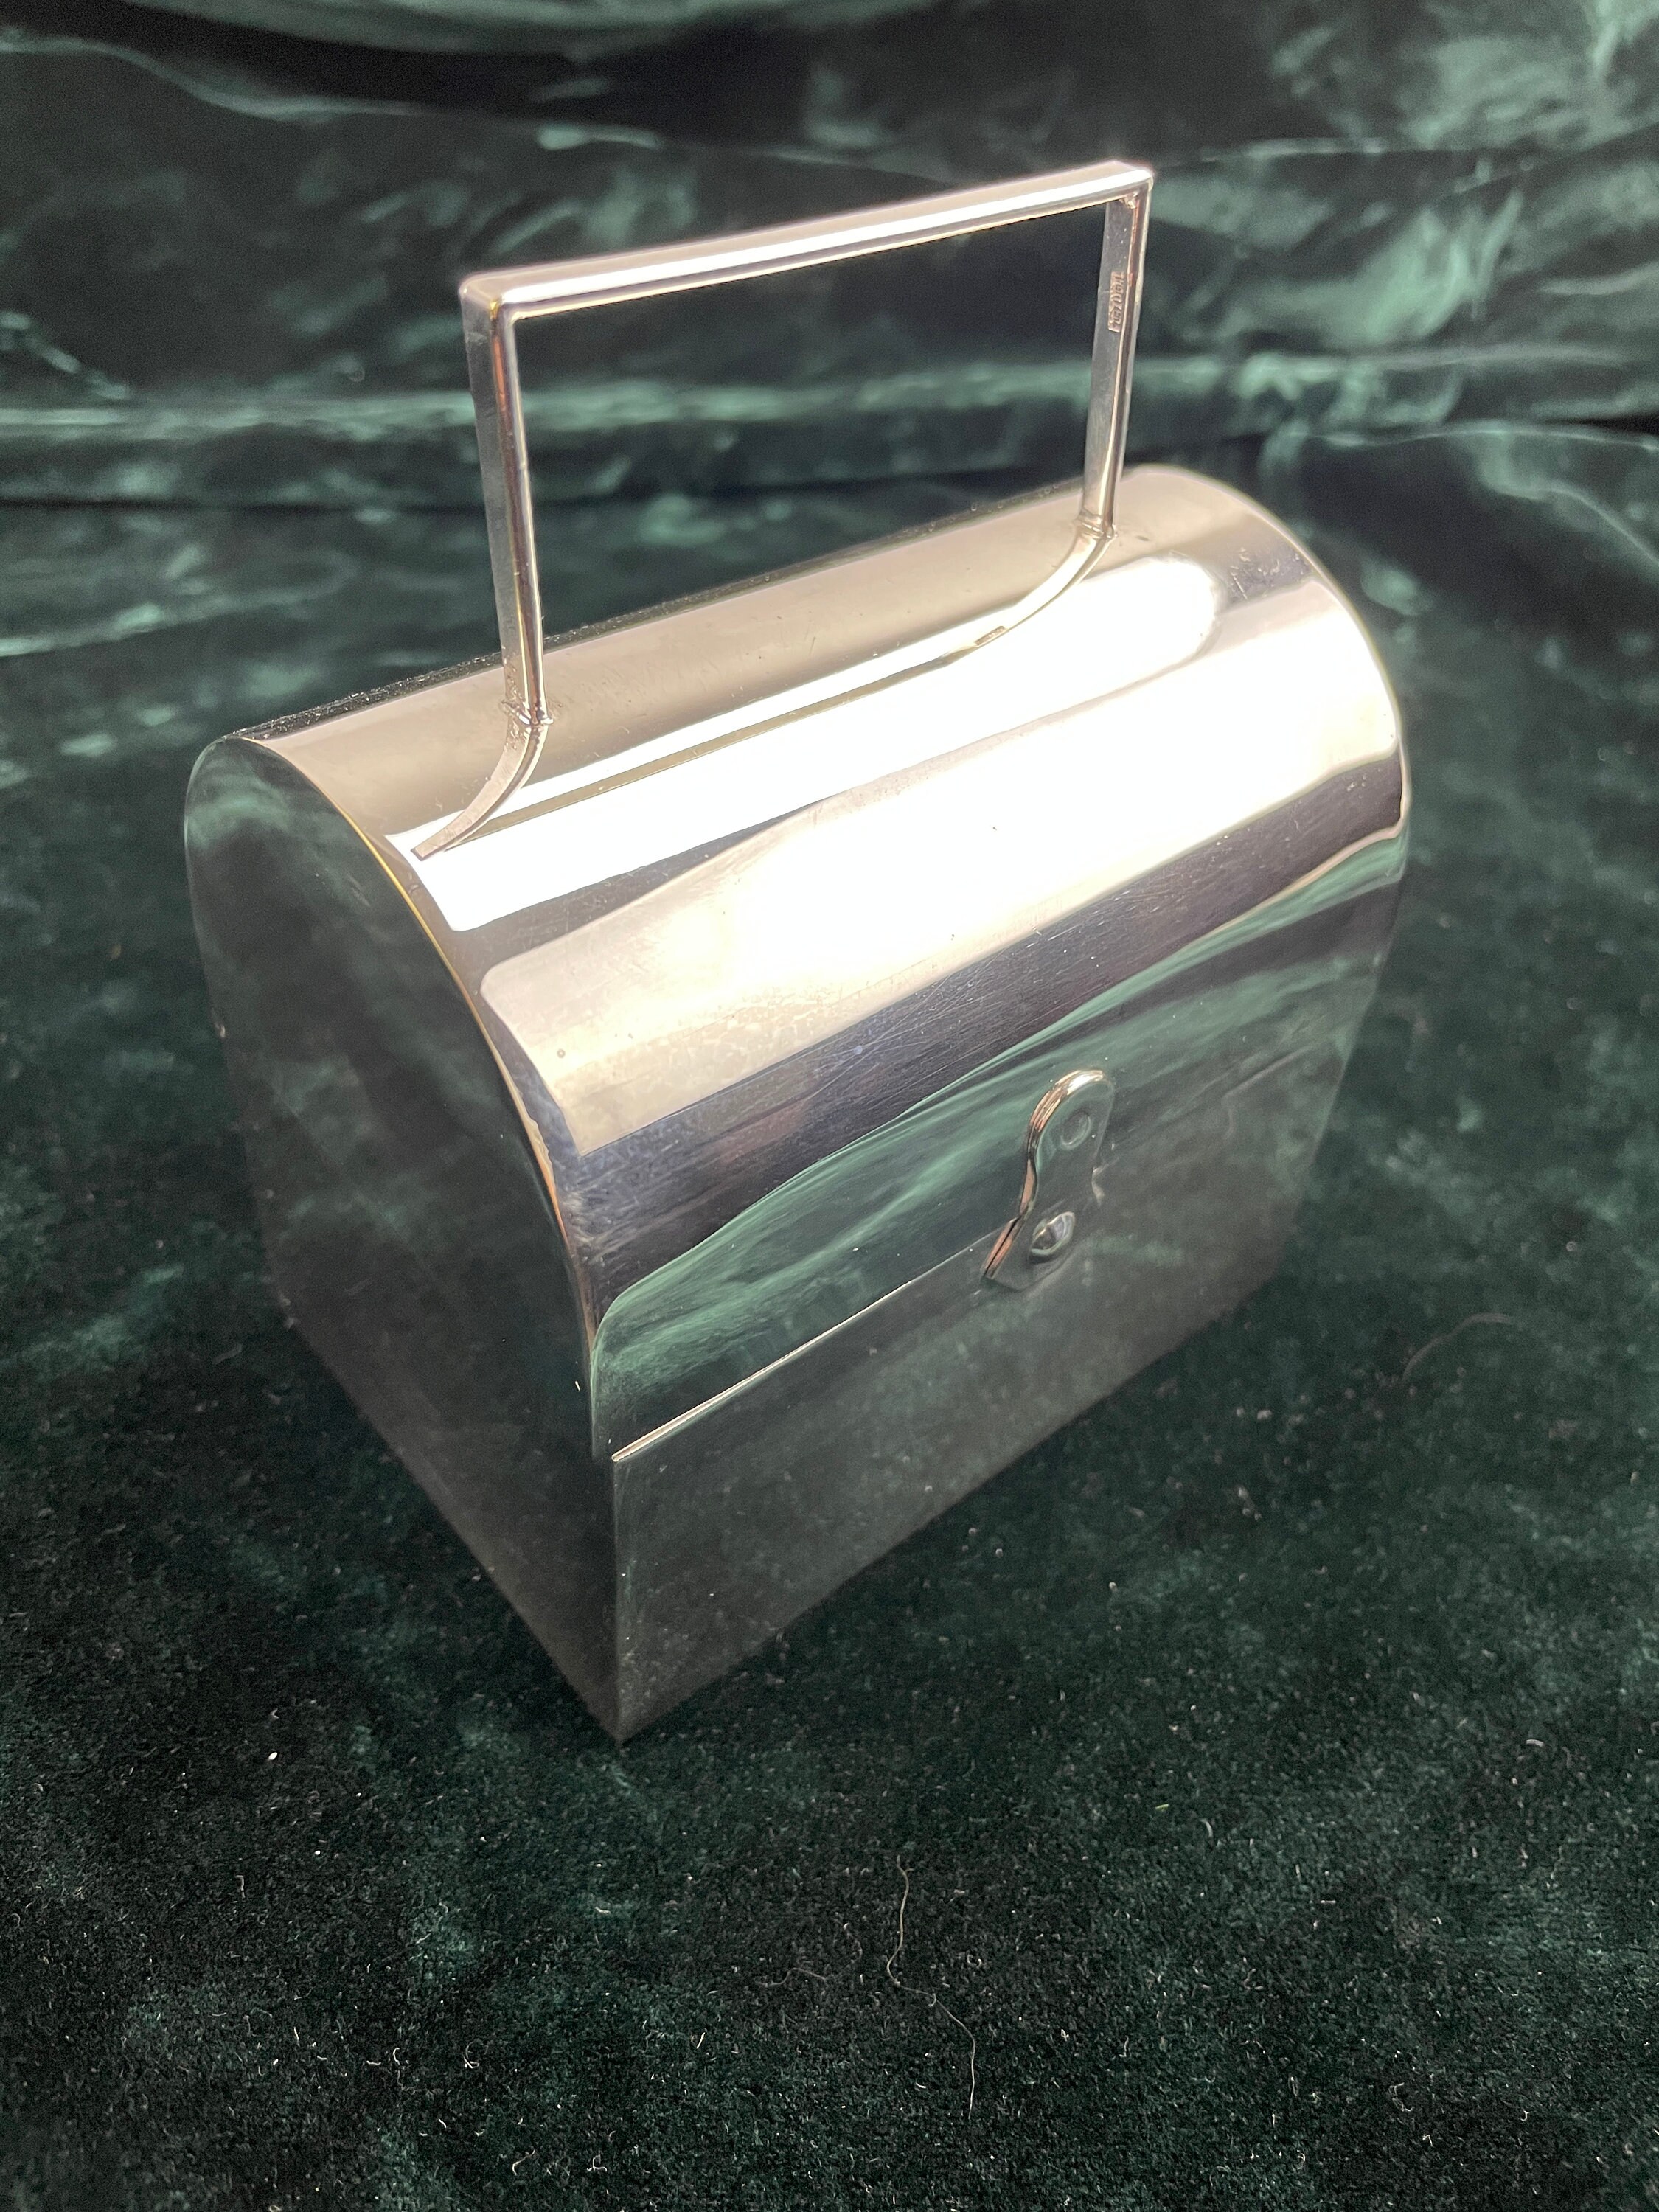 1950s Lunch box style hinged silver plated trinket or jewelry box with handle and stunning blue velvet lining made in Portugalthumbnail